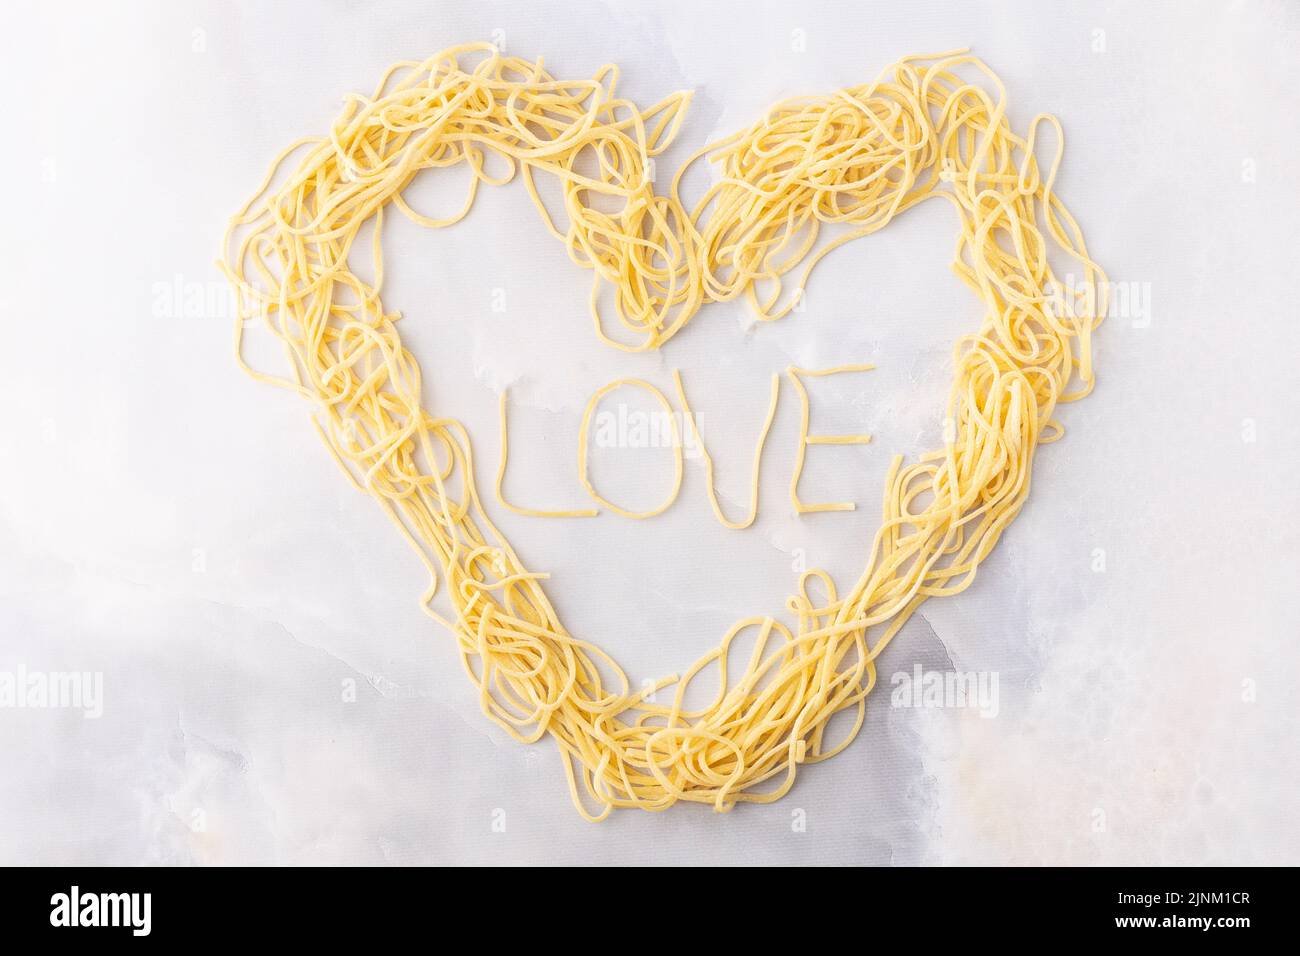 Decorative heart shaped pasta still life formed of pasta topped with tomatoes, basil Stock Photo